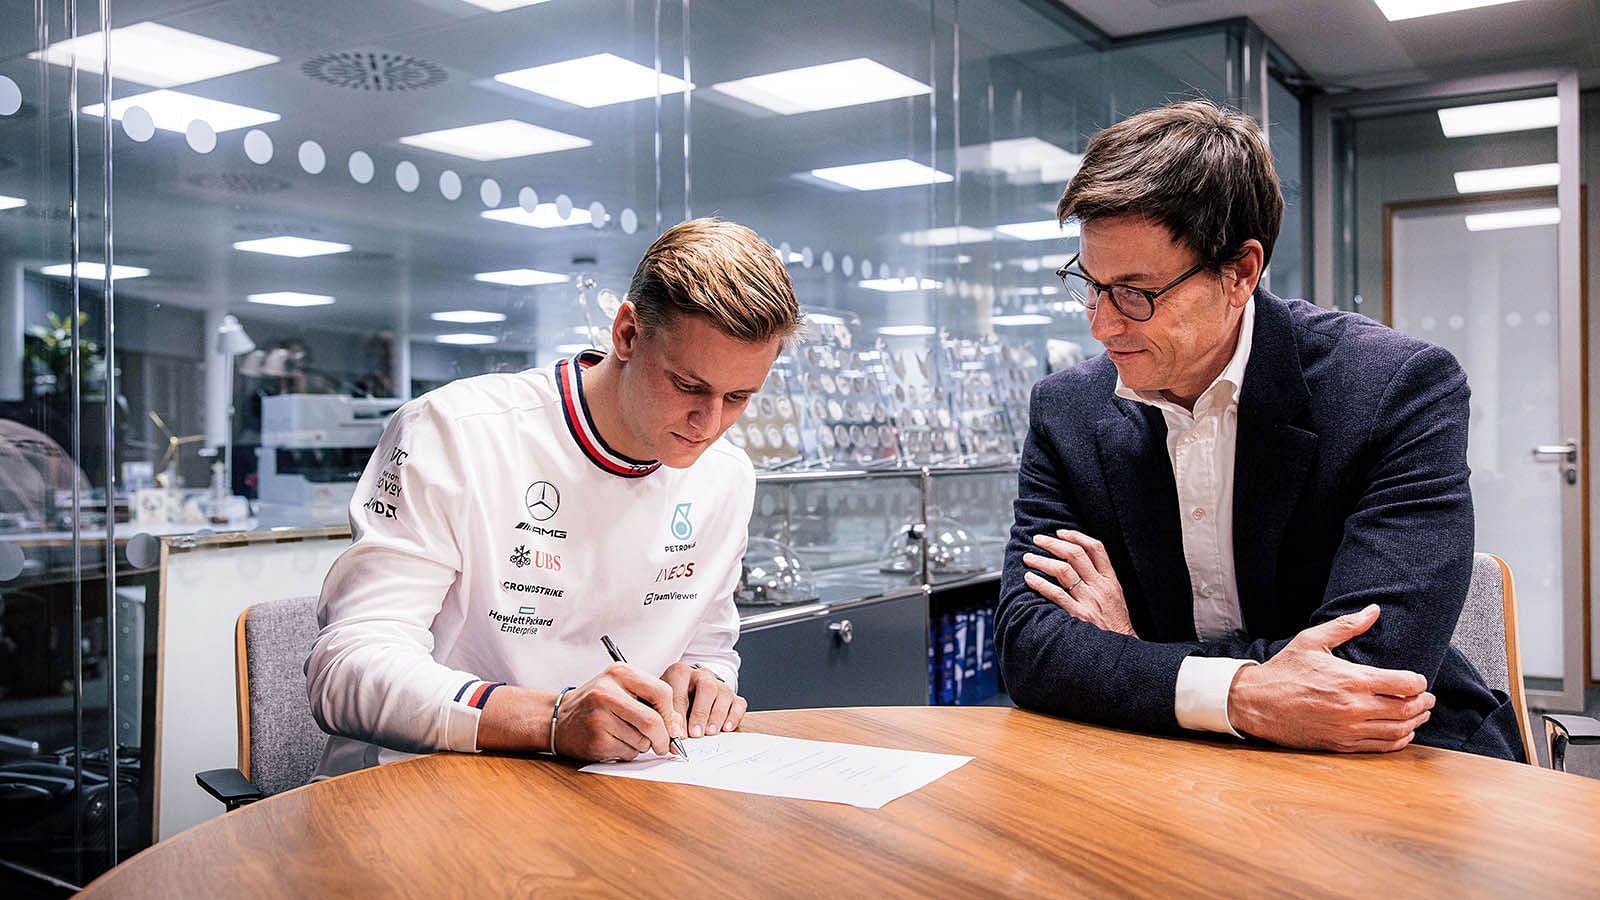 Toto Wolff feels Mick Schumacher could get shot at Mercedes